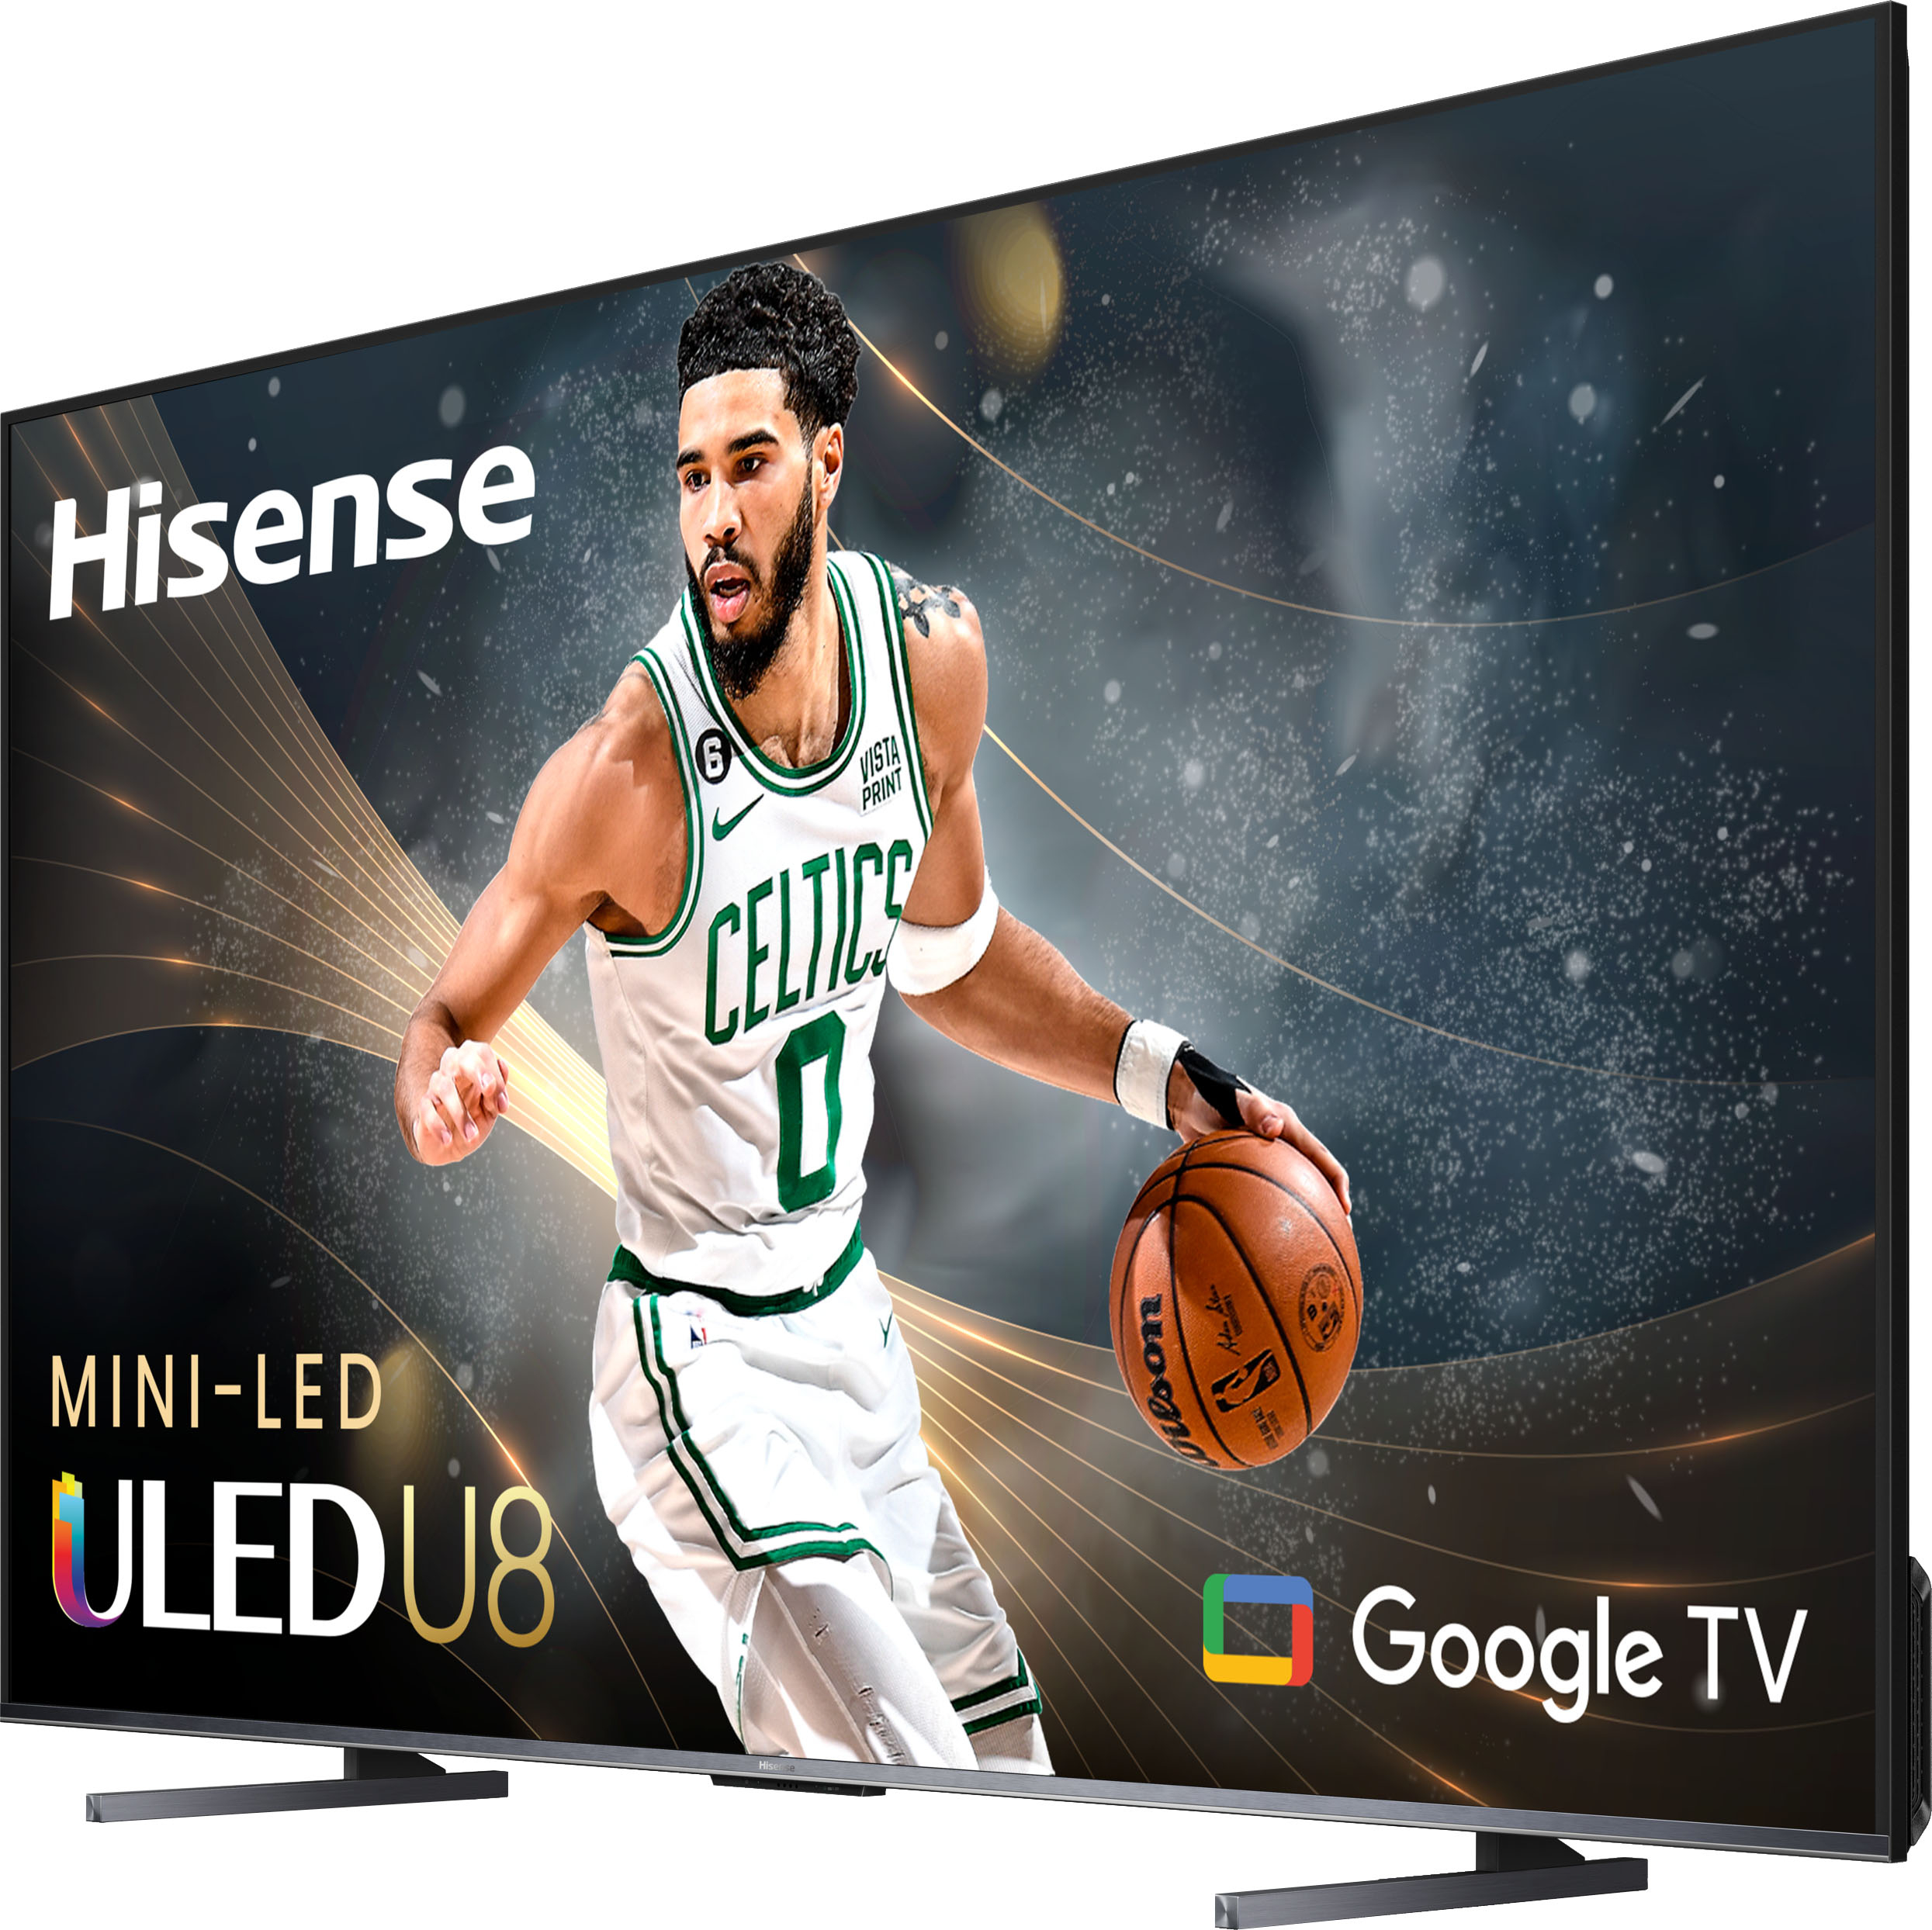 Hisense U6K 4K TV Review: Unmatched Picture Performance on a Budget